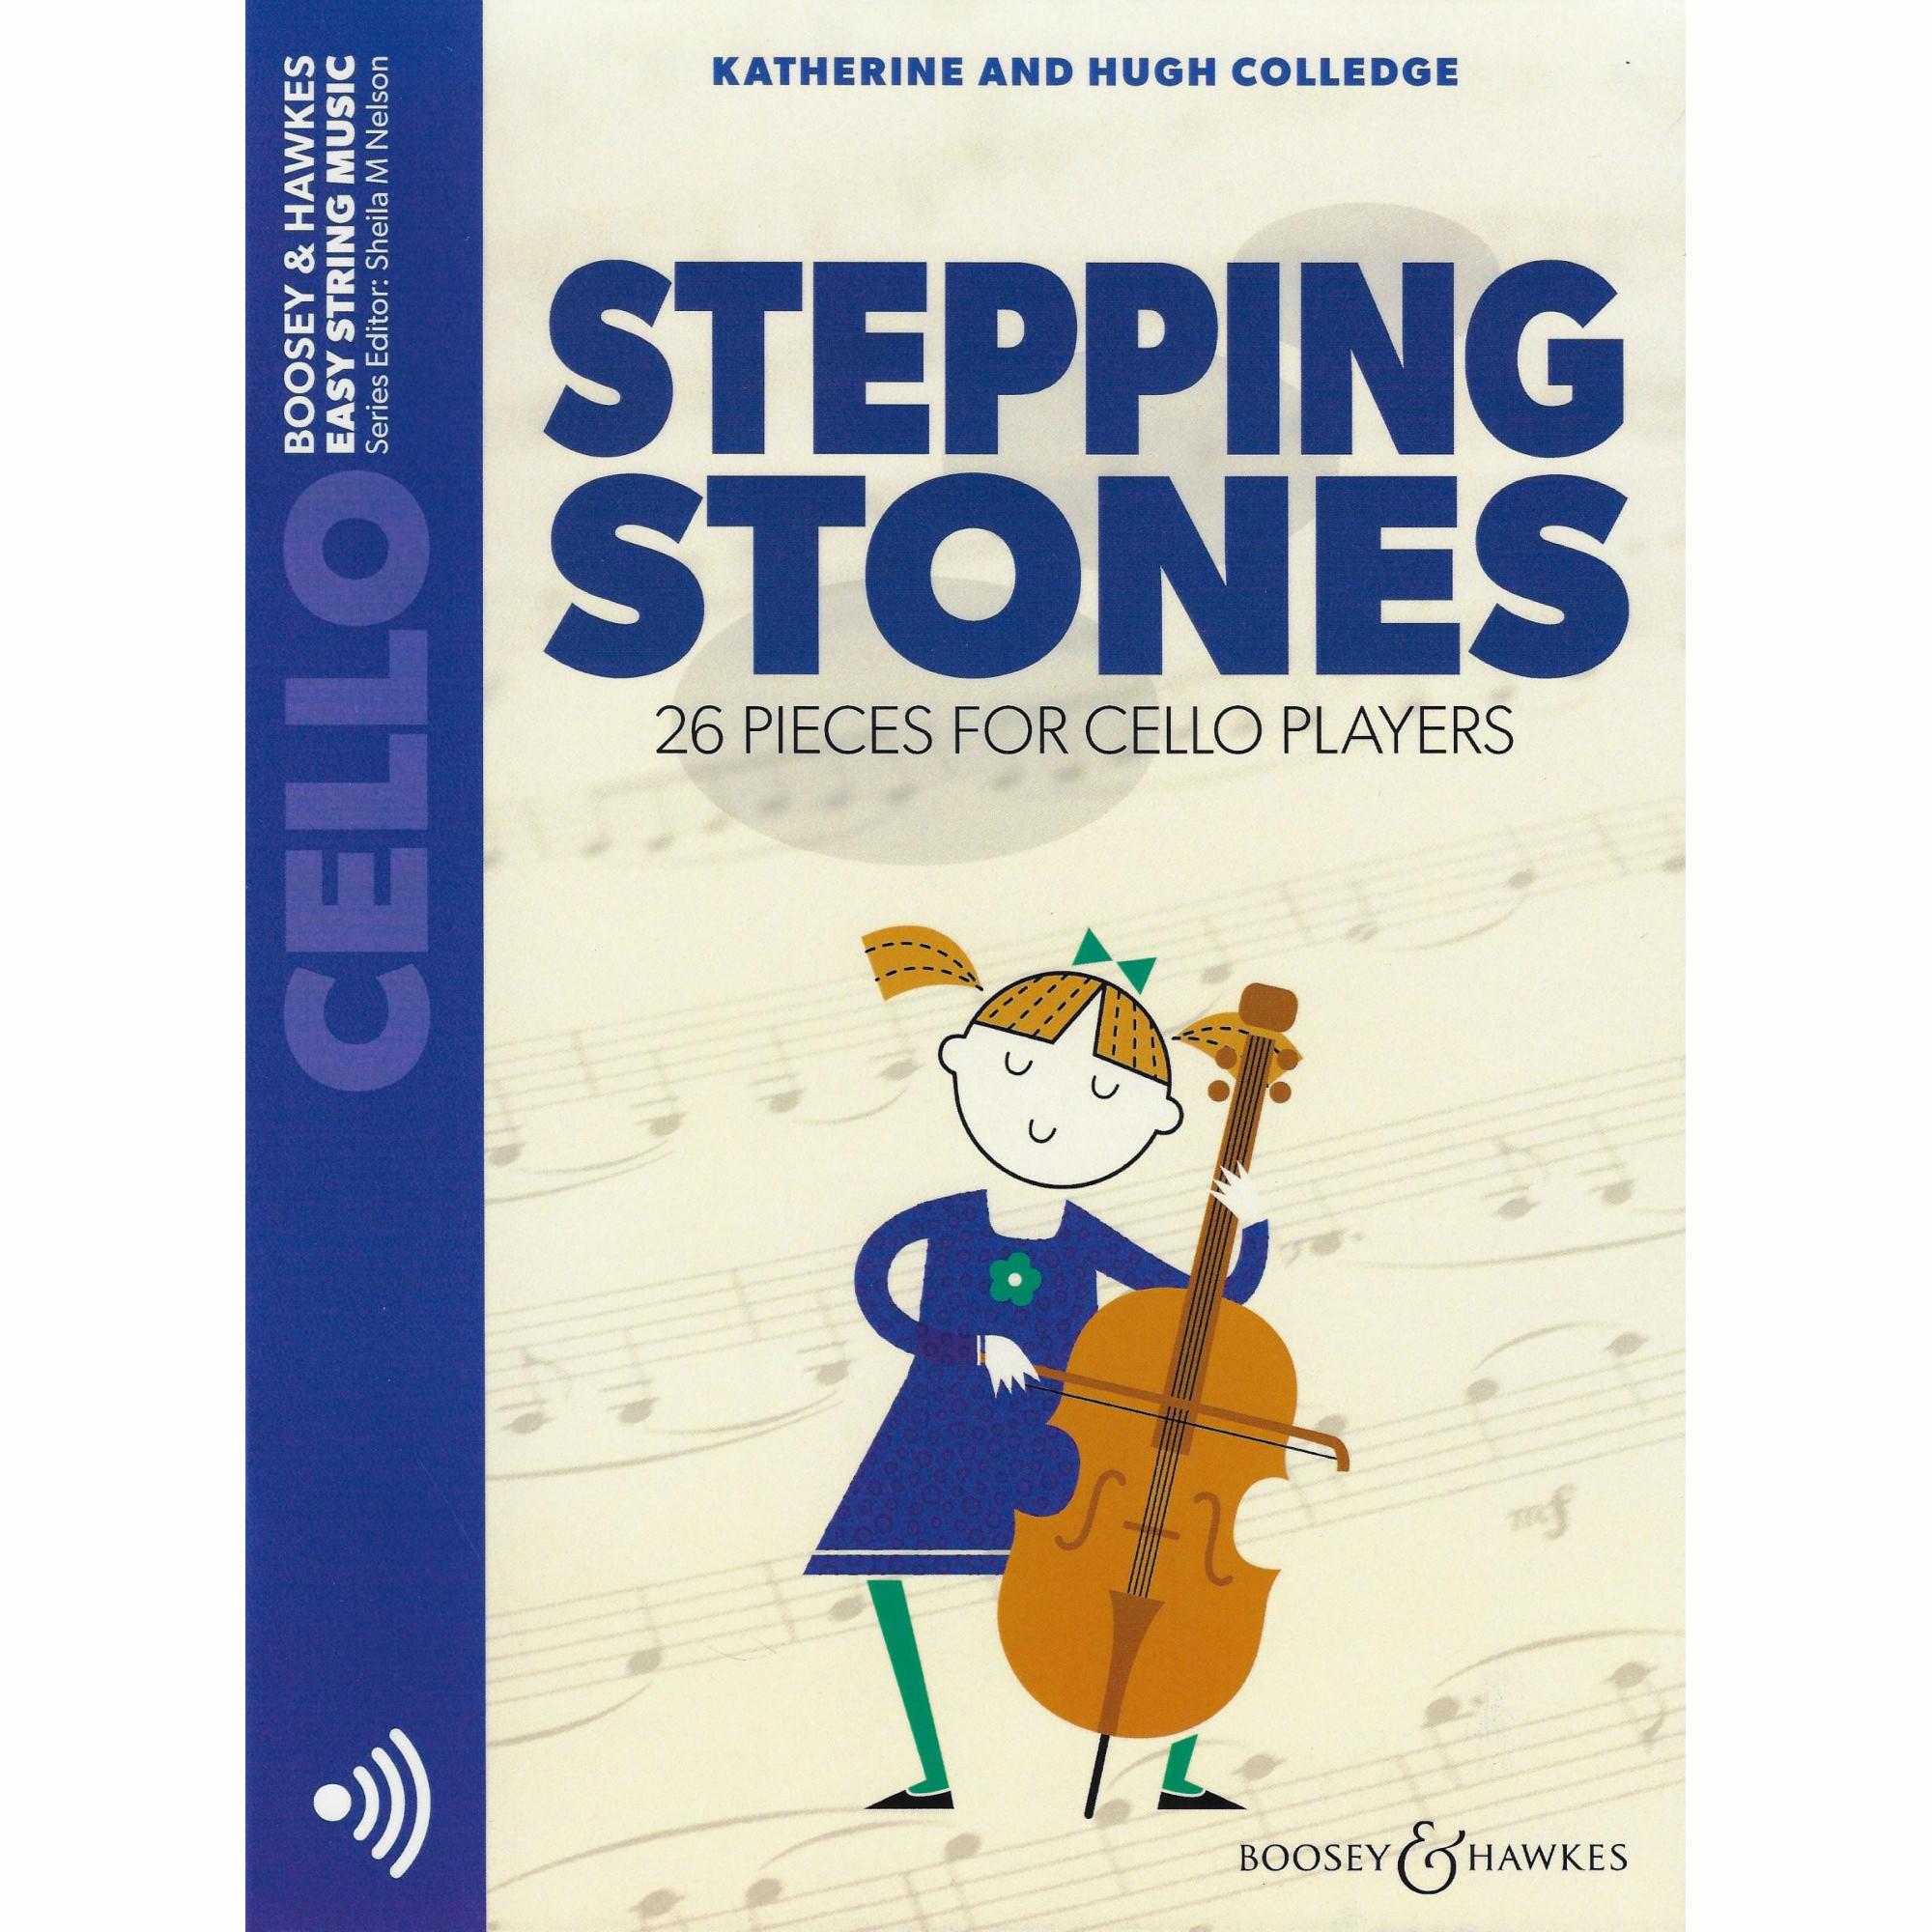 Stepping Stones for Cello